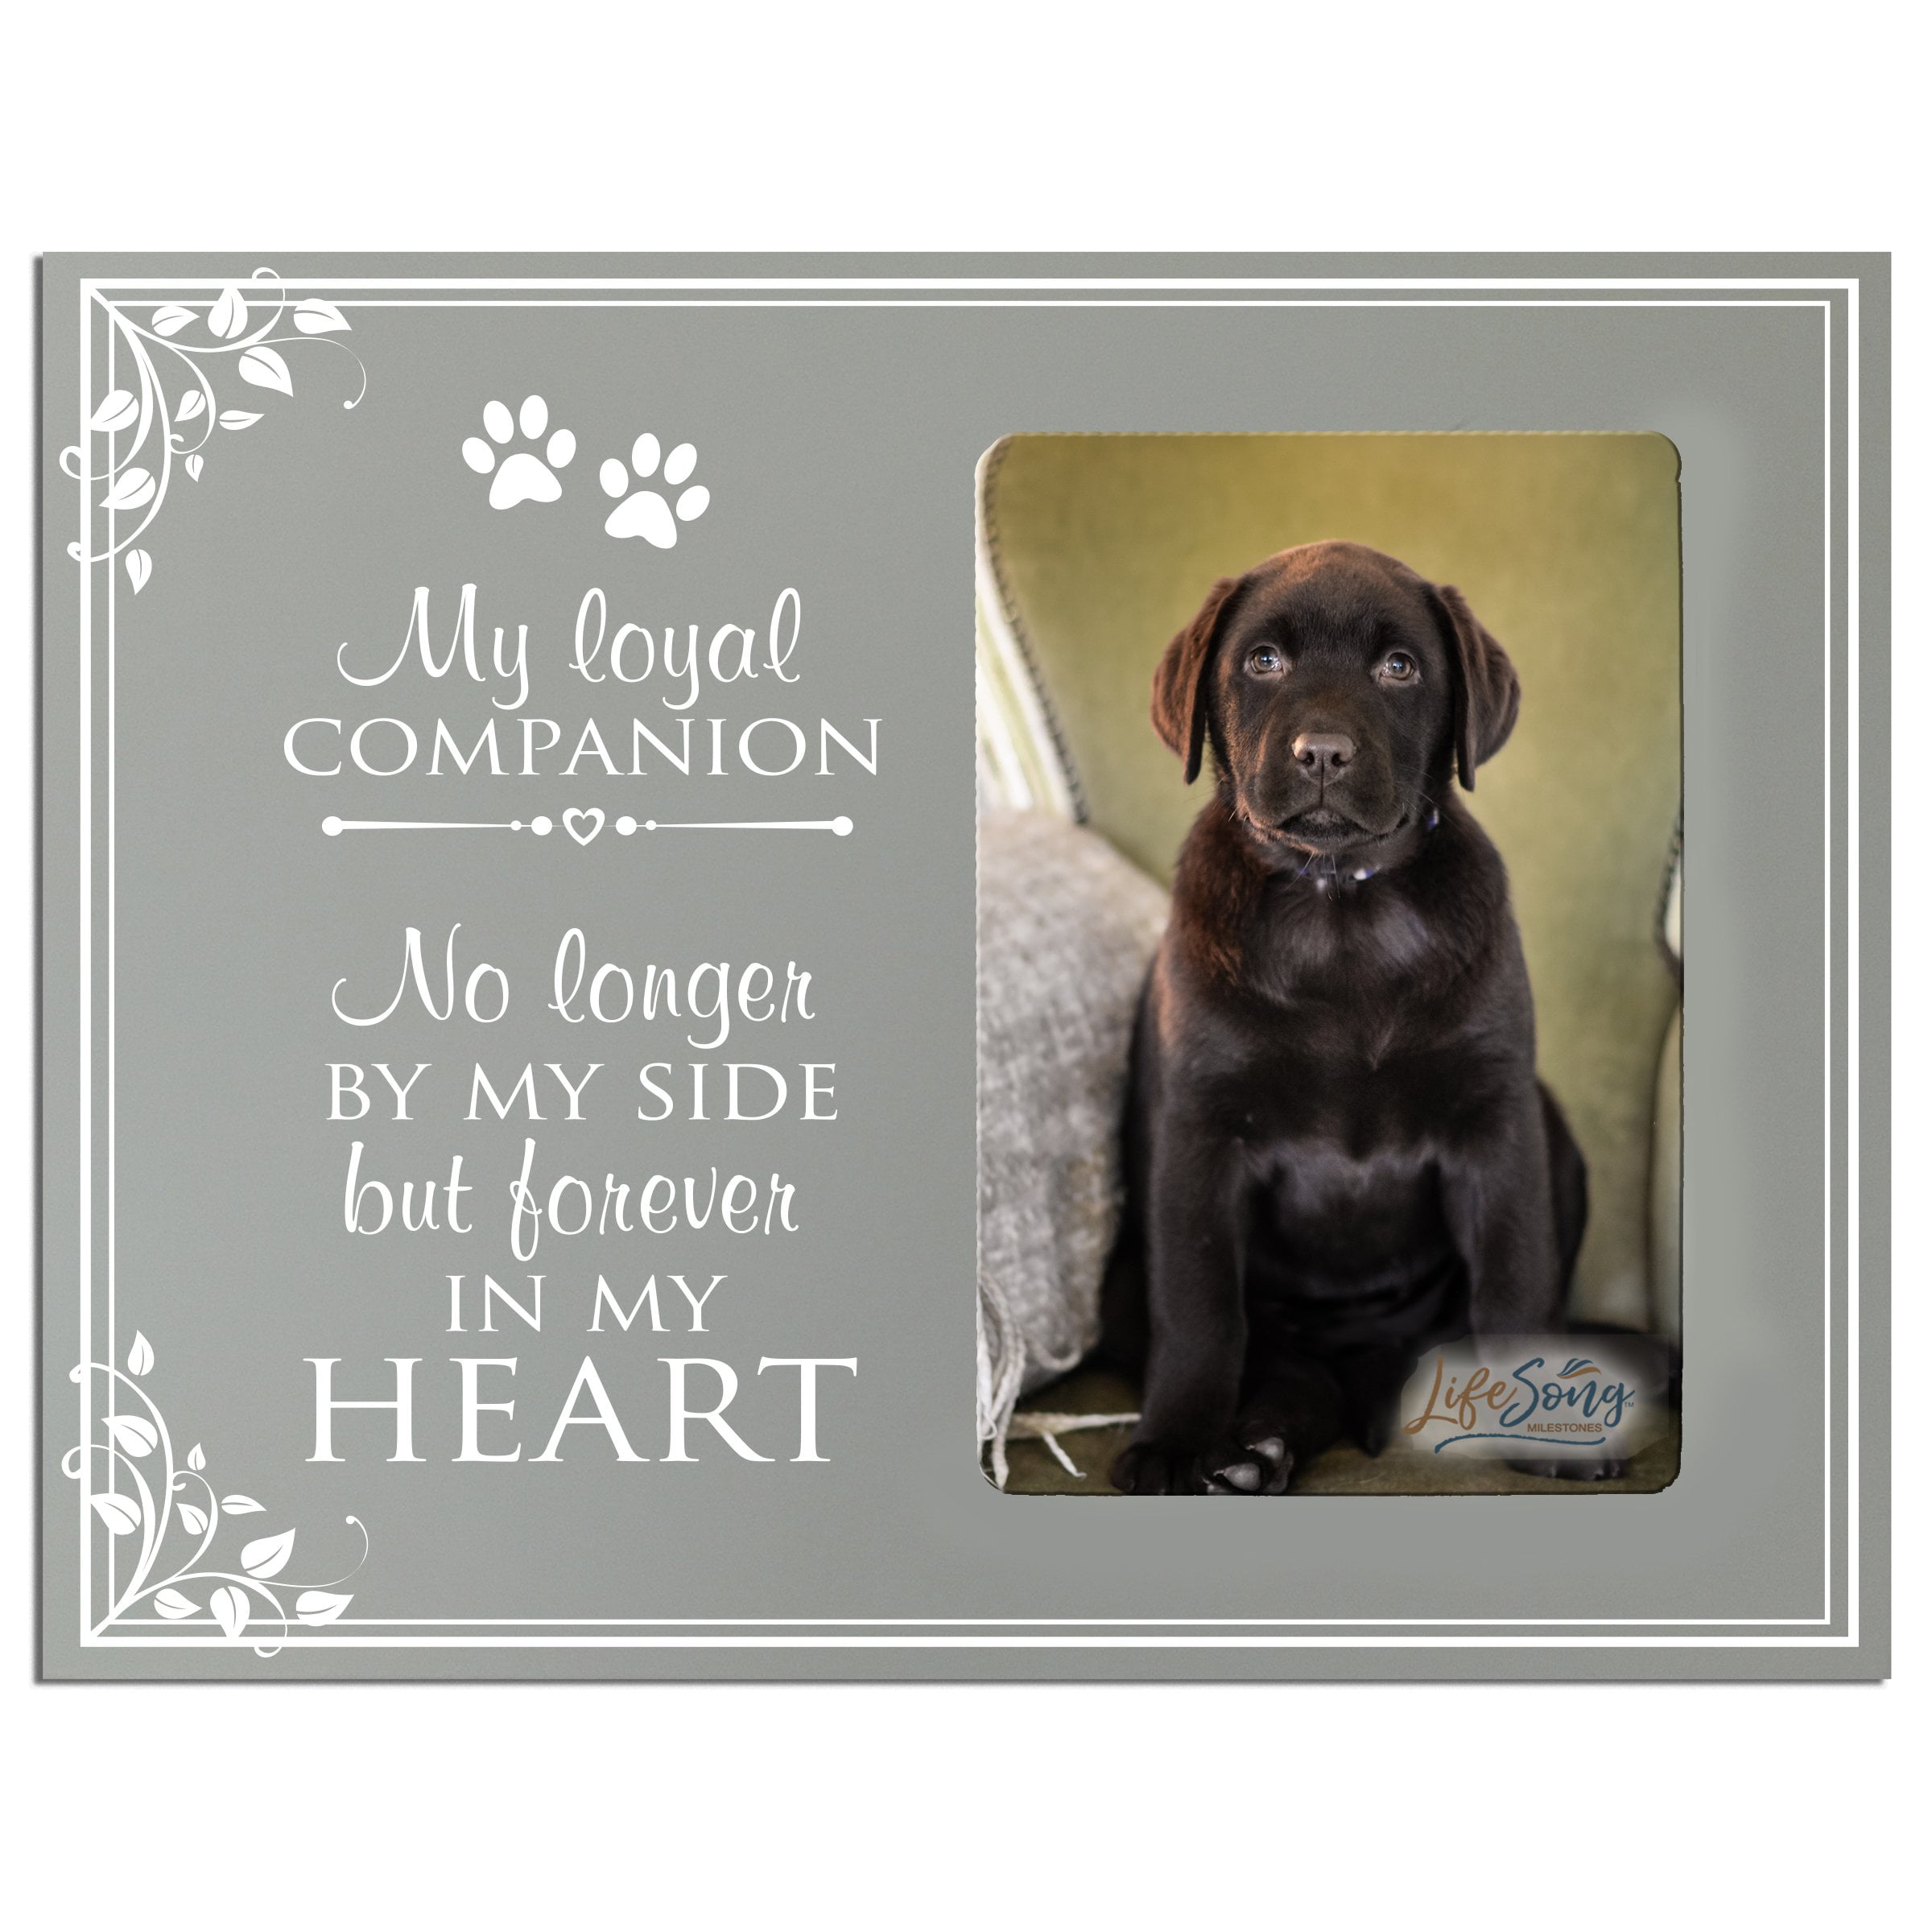 BANBERRY DESIGNS Cat/Dog Memorial Ceramic Picture Frame No Longer Cuddling by My Side Furever in My Heart Loss of a Pet Photo Frame Sympathy Gift in Memory of a Pet